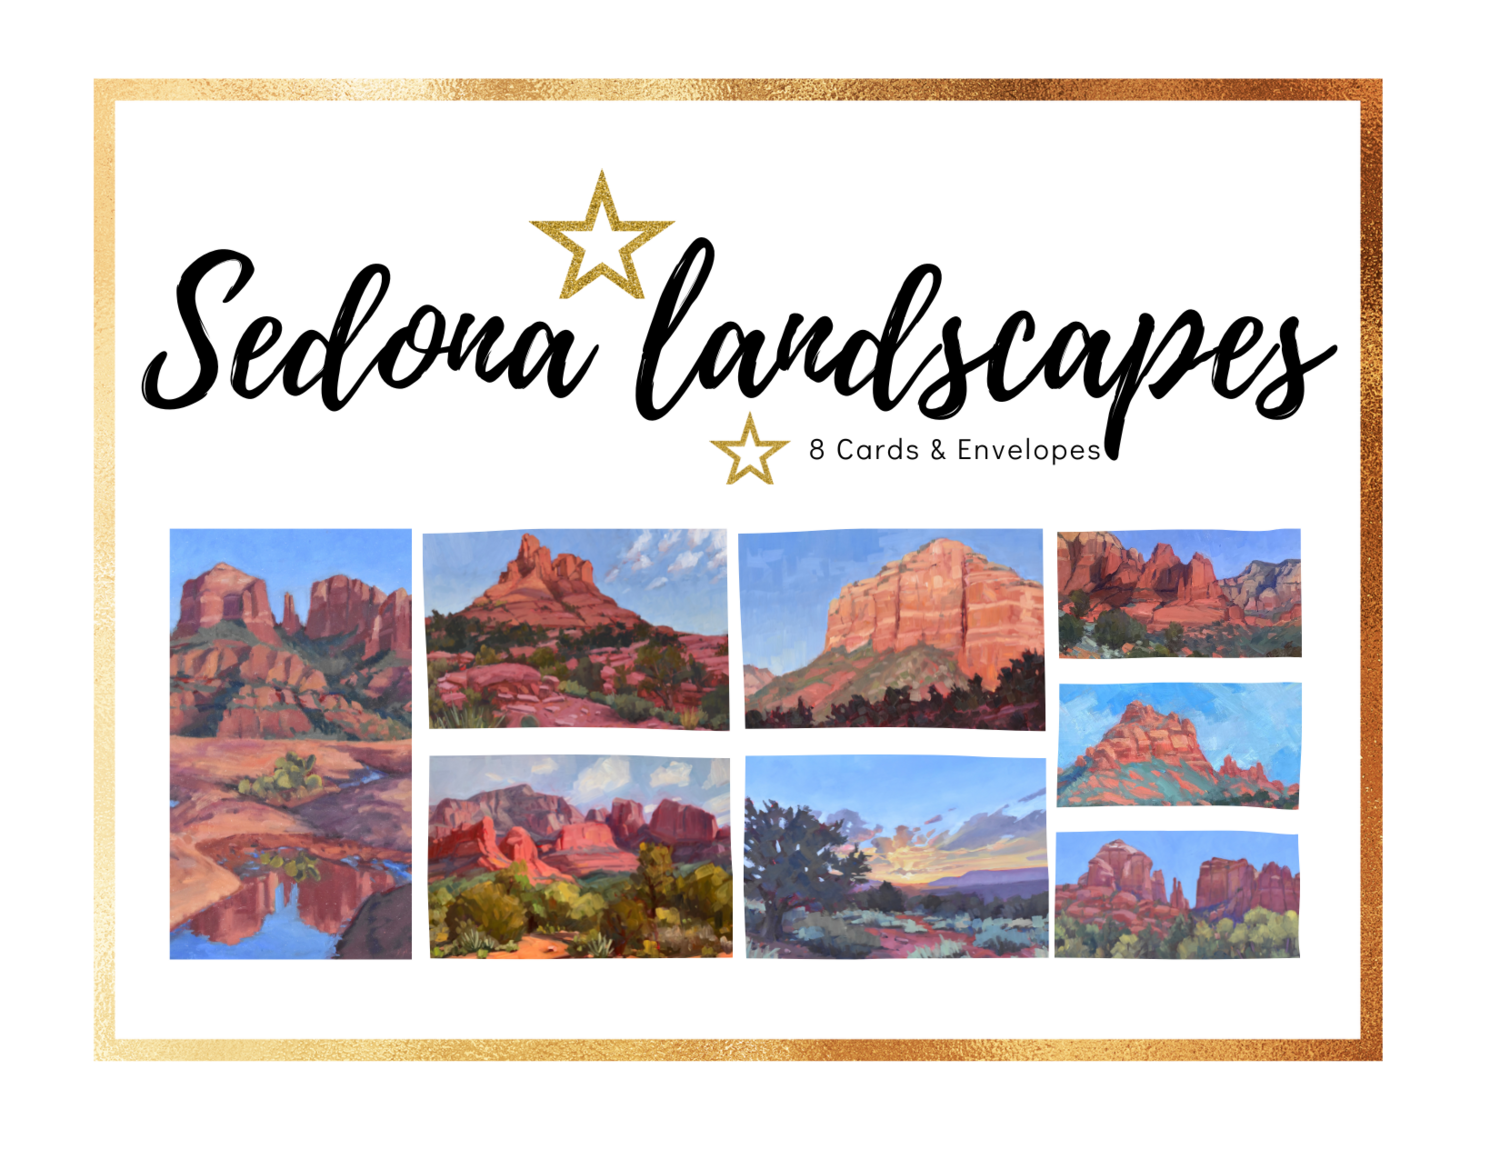 Greeting Cards - Pack of 8 with Envelopes - Sedona Landscapes